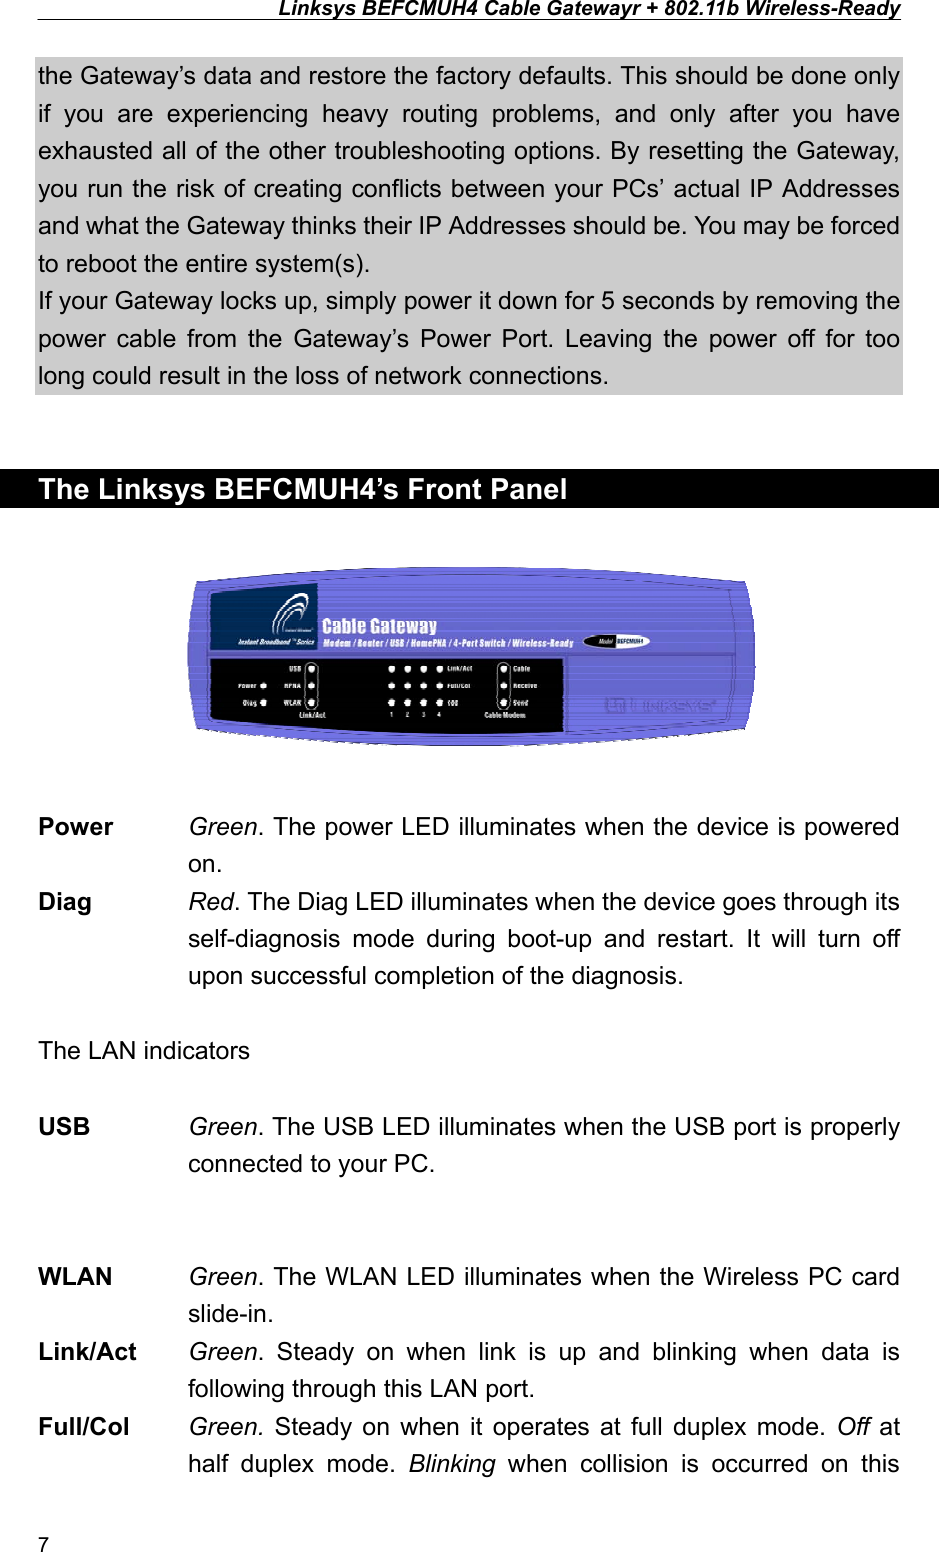 Linksys BEFCMUH4 Cable Gatewayr + 802.11b Wireless-Ready  the Gateway’s data and restore the factory defaults. This should be done only if you are experiencing heavy routing problems, and only after you have exhausted all of the other troubleshooting options. By resetting the Gateway, you run the risk of creating conflicts between your PCs’ actual IP Addresses and what the Gateway thinks their IP Addresses should be. You may be forced to reboot the entire system(s). If your Gateway locks up, simply power it down for 5 seconds by removing the power cable from the Gateway’s Power Port. Leaving the power off for too long could result in the loss of network connections.   The Linksys BEFCMUH4’s Front Panel    Power Green. The power LED illuminates when the device is powered on. Diag  Red. The Diag LED illuminates when the device goes through its self-diagnosis mode during boot-up and restart. It will turn off upon successful completion of the diagnosis.  The LAN indicators  USB  Green. The USB LED illuminates when the USB port is properly connected to your PC. WLAN  Green. The WLAN LED illuminates when the Wireless PC card slide-in. Link/Act  Green. Steady on when link is up and blinking when data is following through this LAN port. Full/Col  Green.  Steady on when it operates at full duplex mode. Off at half duplex mode. Blinking when collision is occurred on this 7 